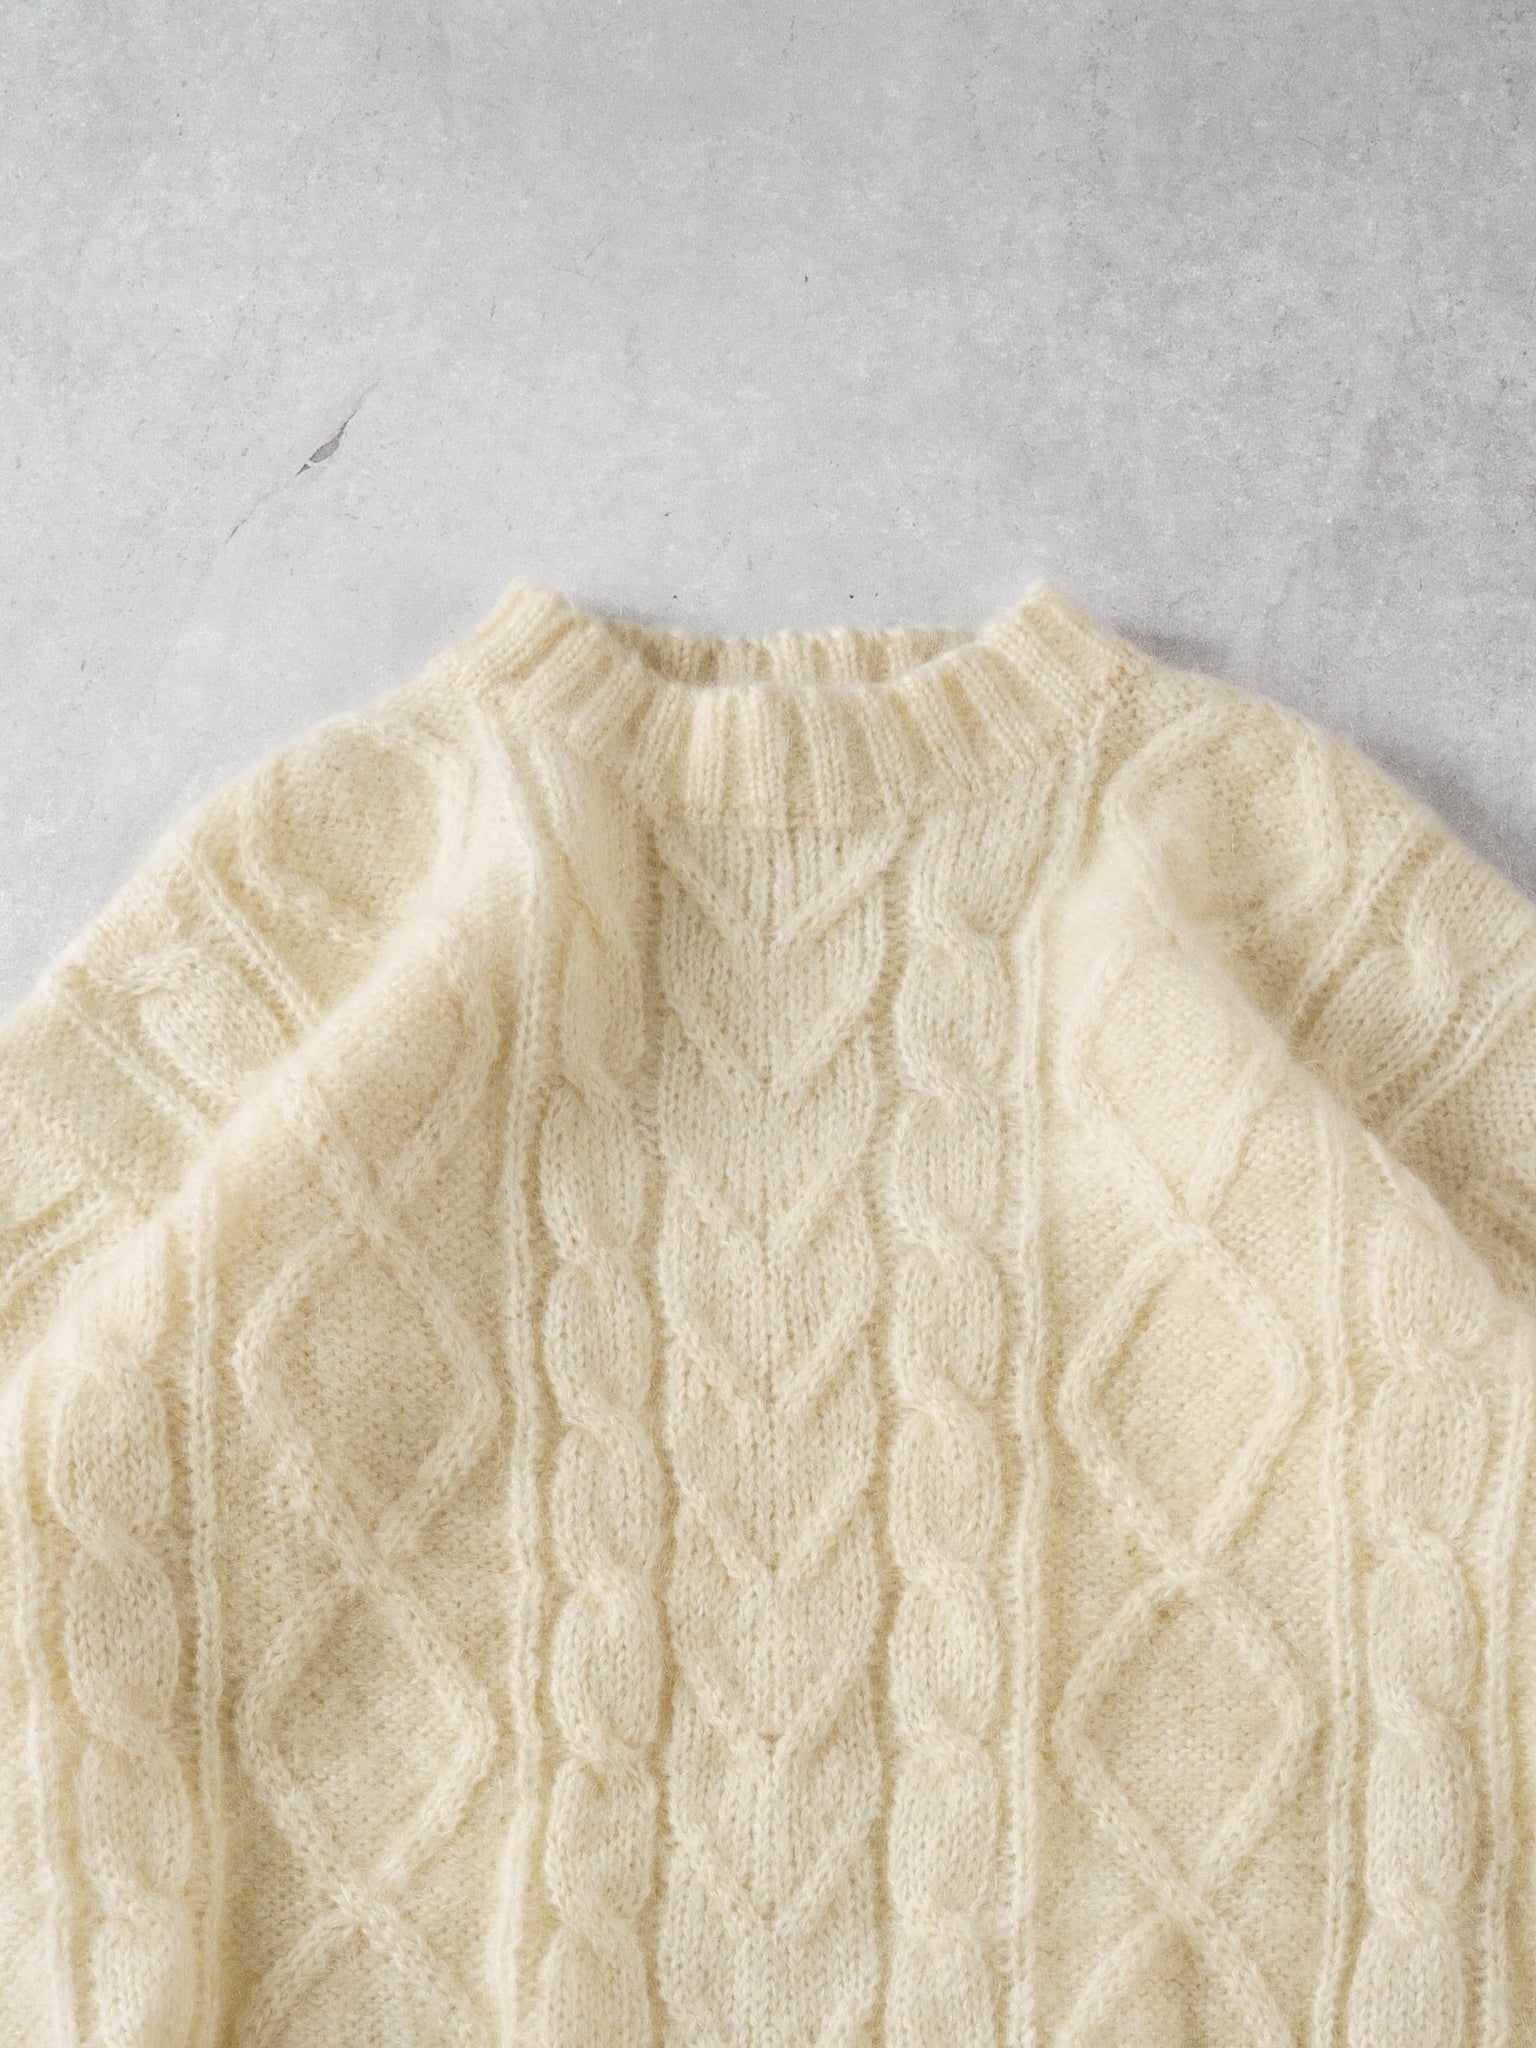 Vintage 90s Beige Mohair Cable Knit Sweater (M)